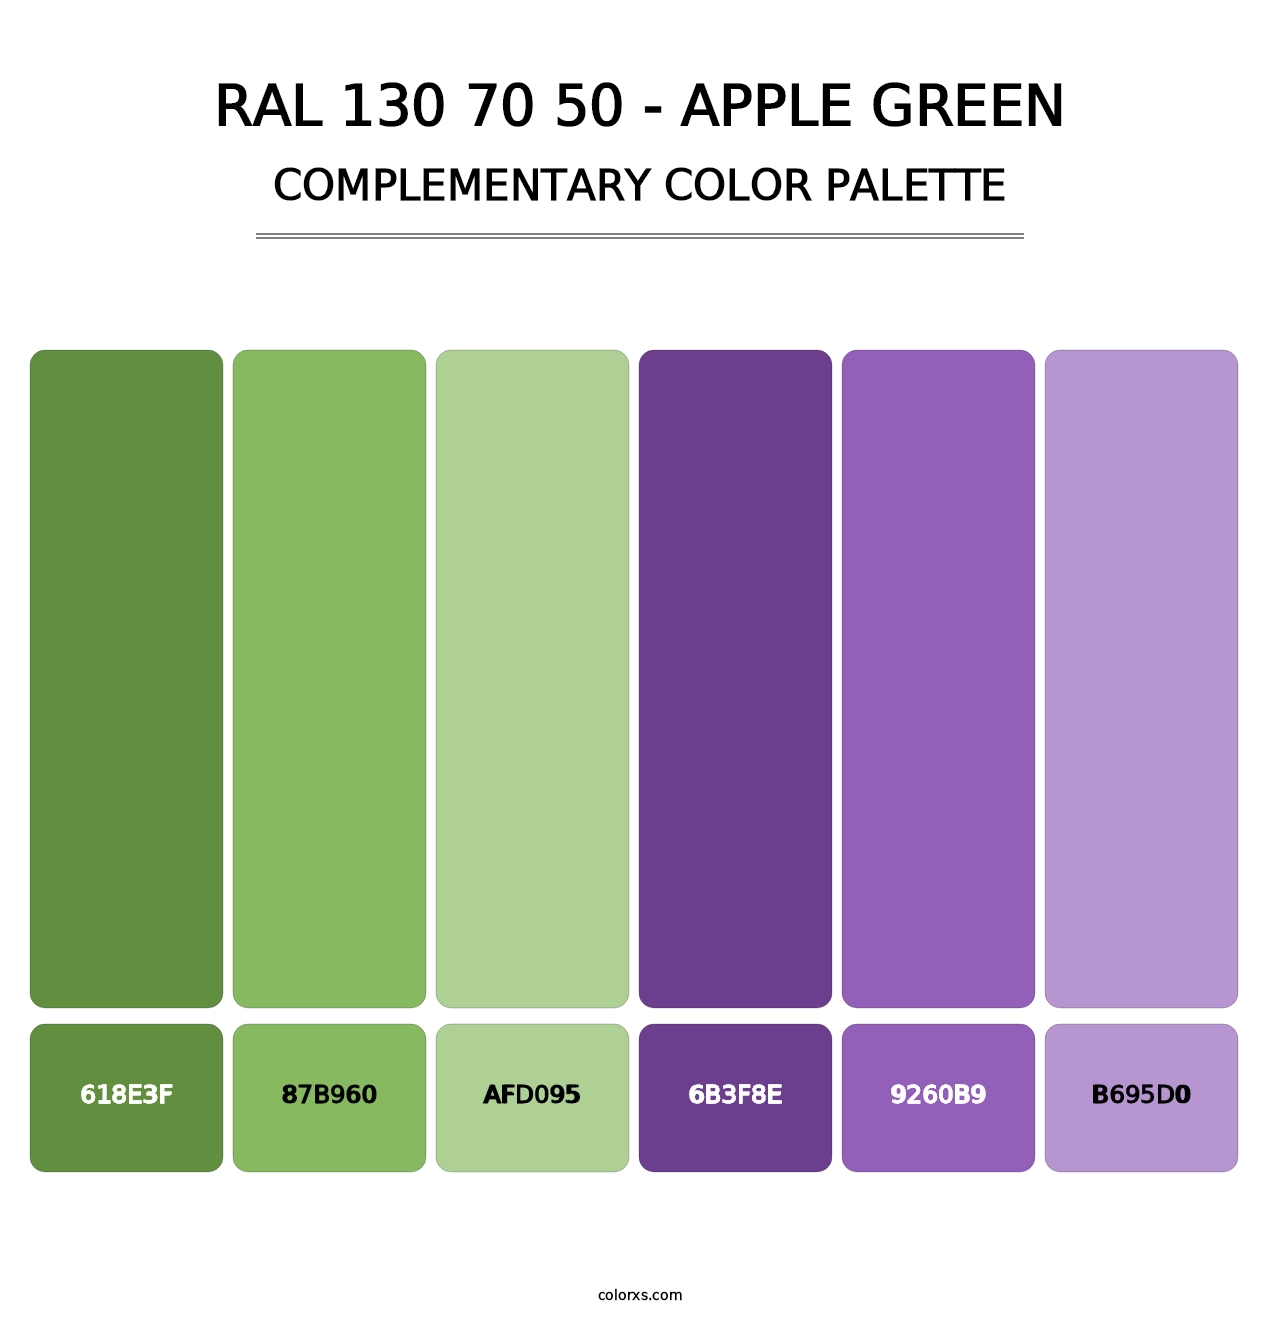 RAL 130 70 50 - Apple Green - Complementary Color Palette